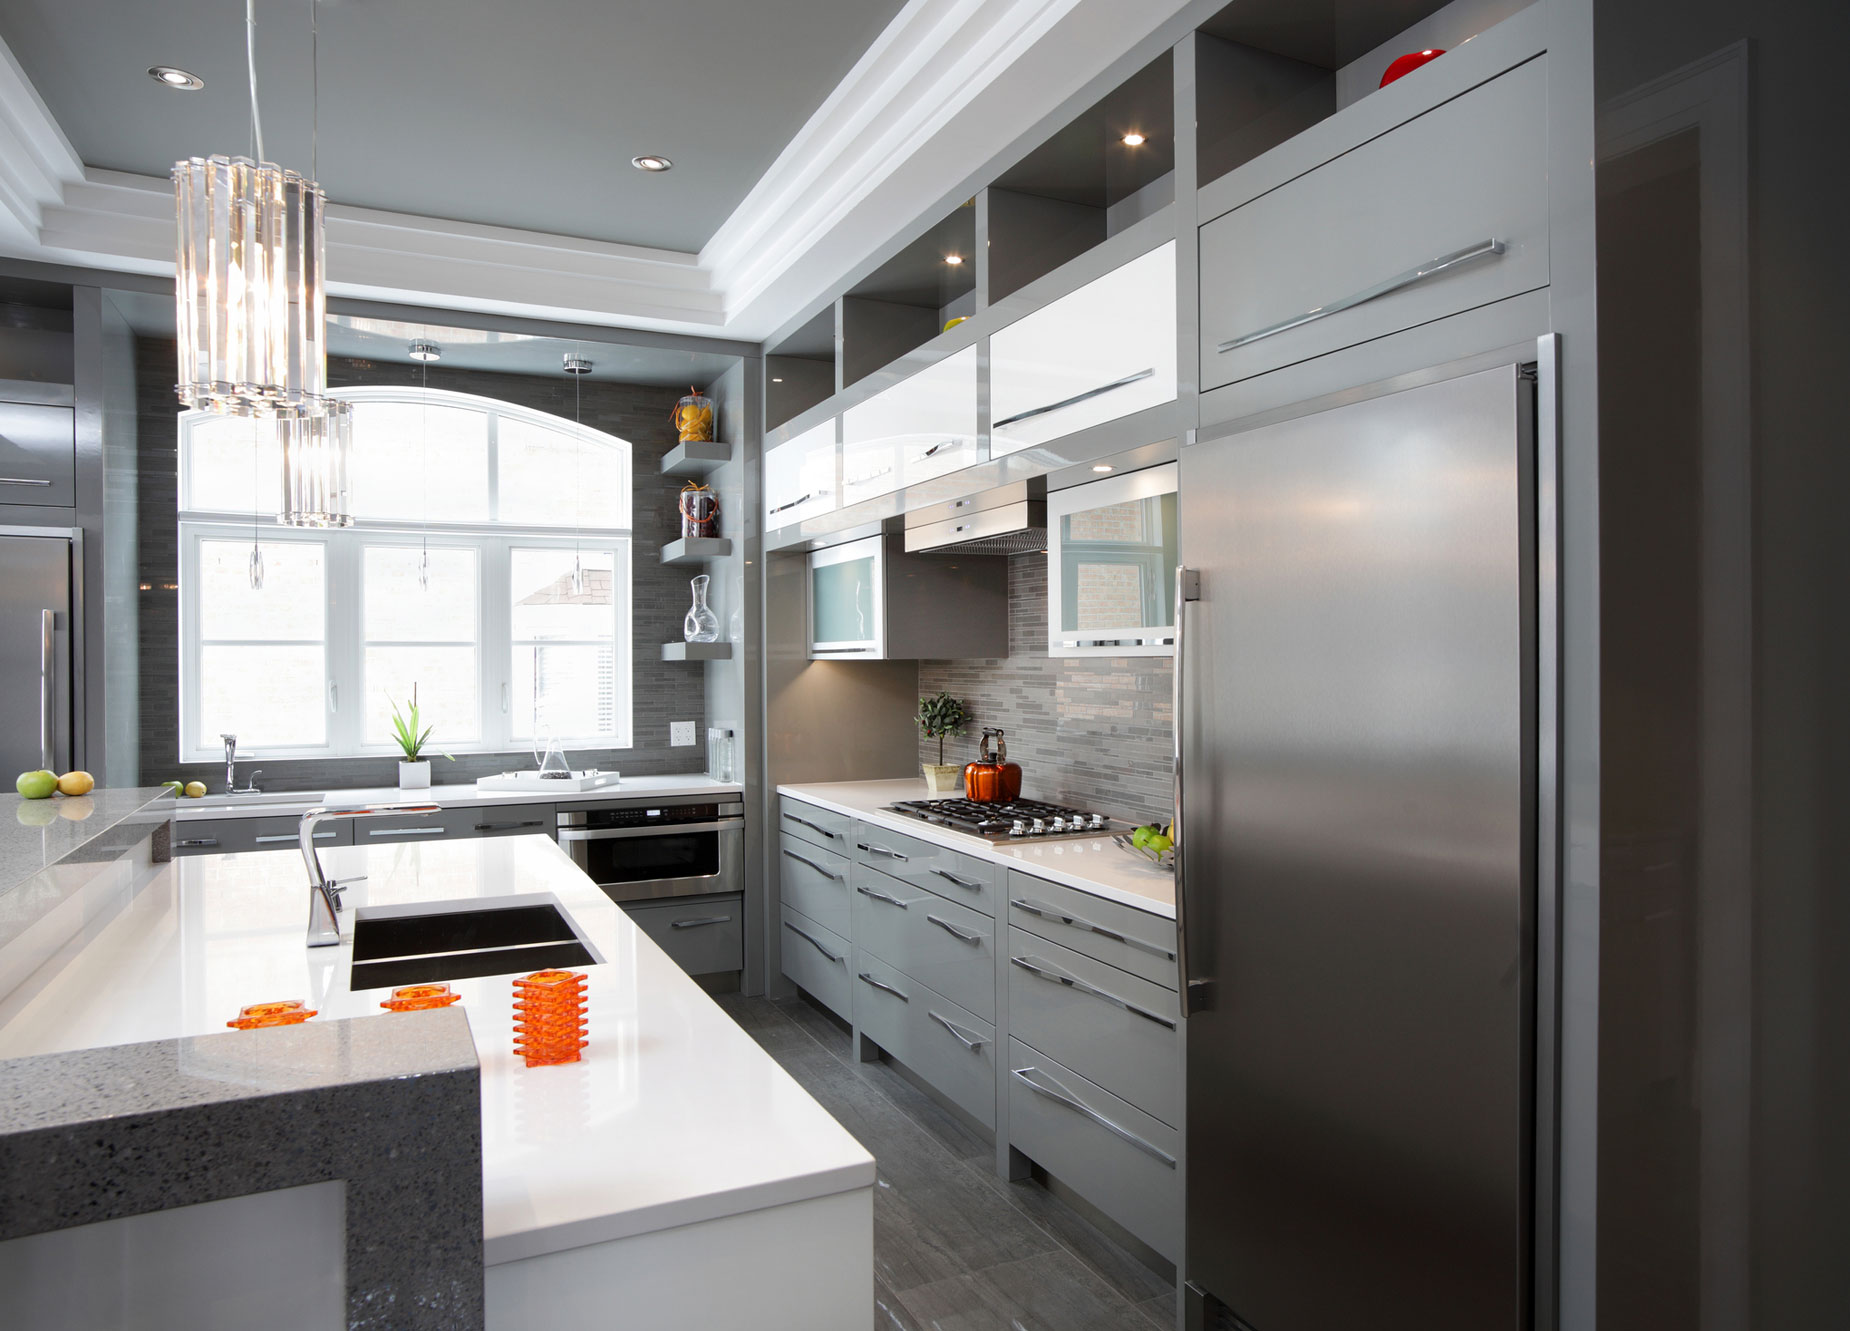 A brightly lit grey kitchen with steel fridge and while marble countertops